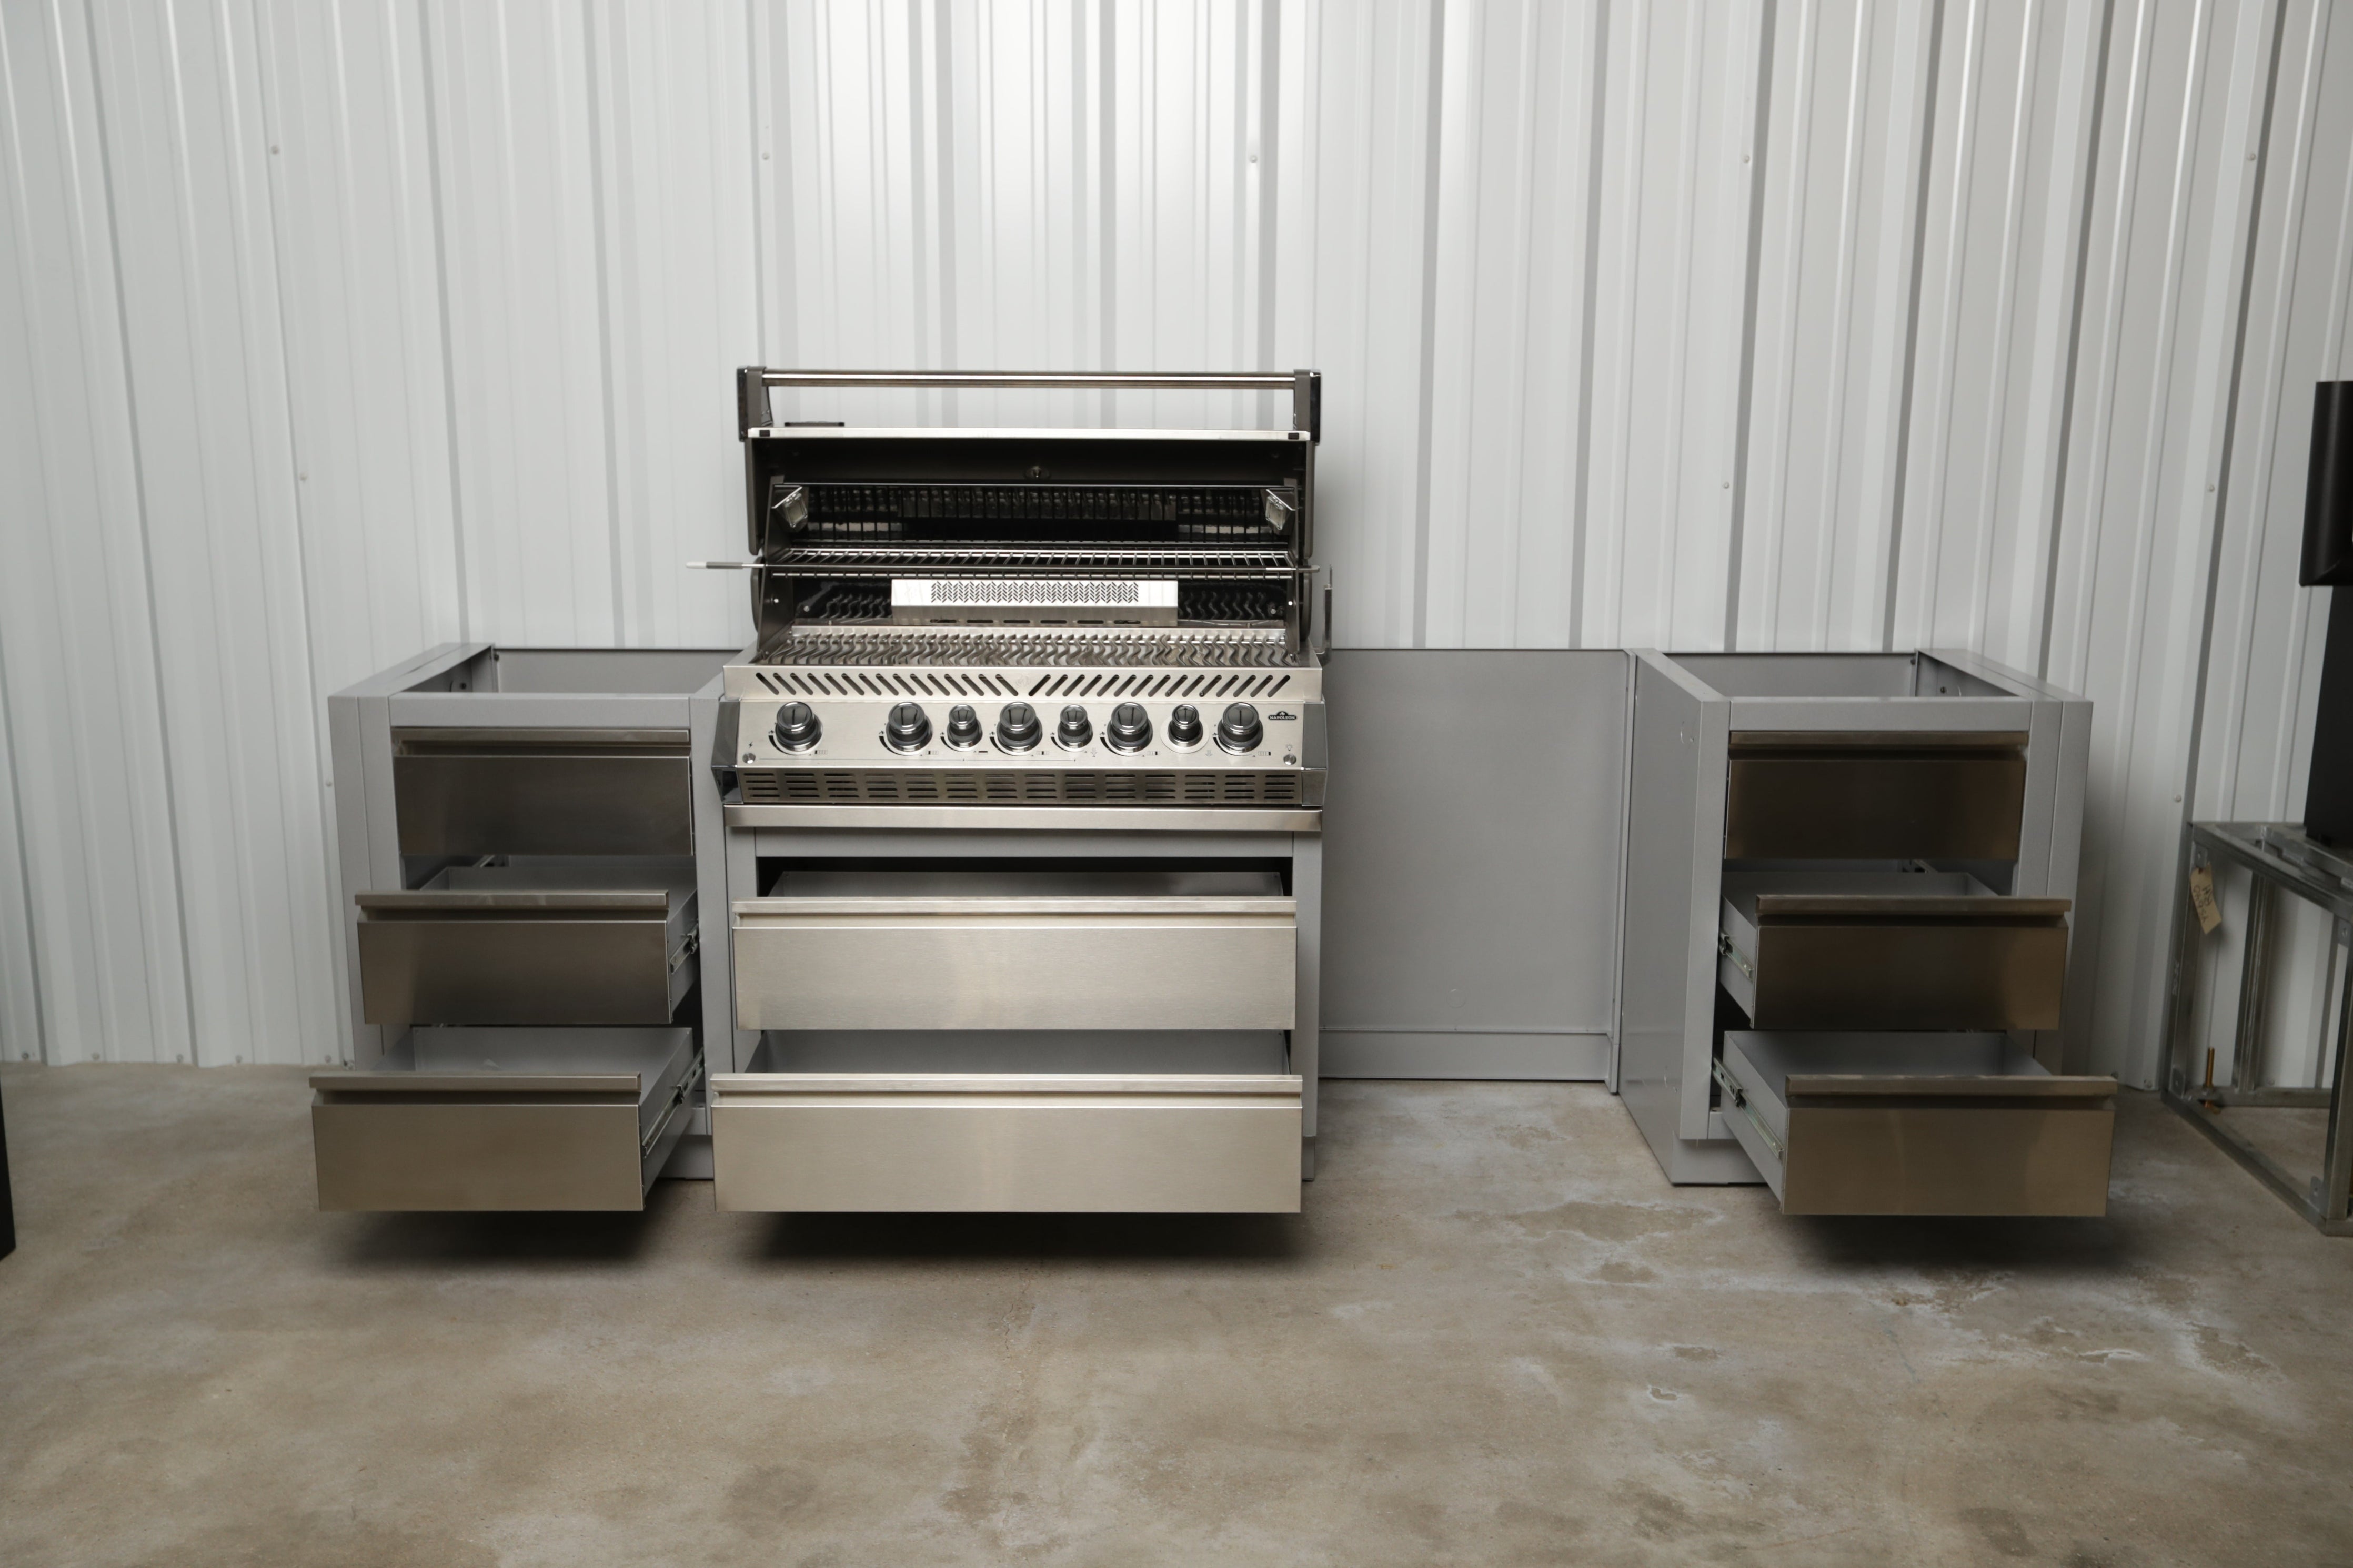 Local Special, Napoleon Oasis Display with BIPRO665RBNSS-3 Grill 12044501